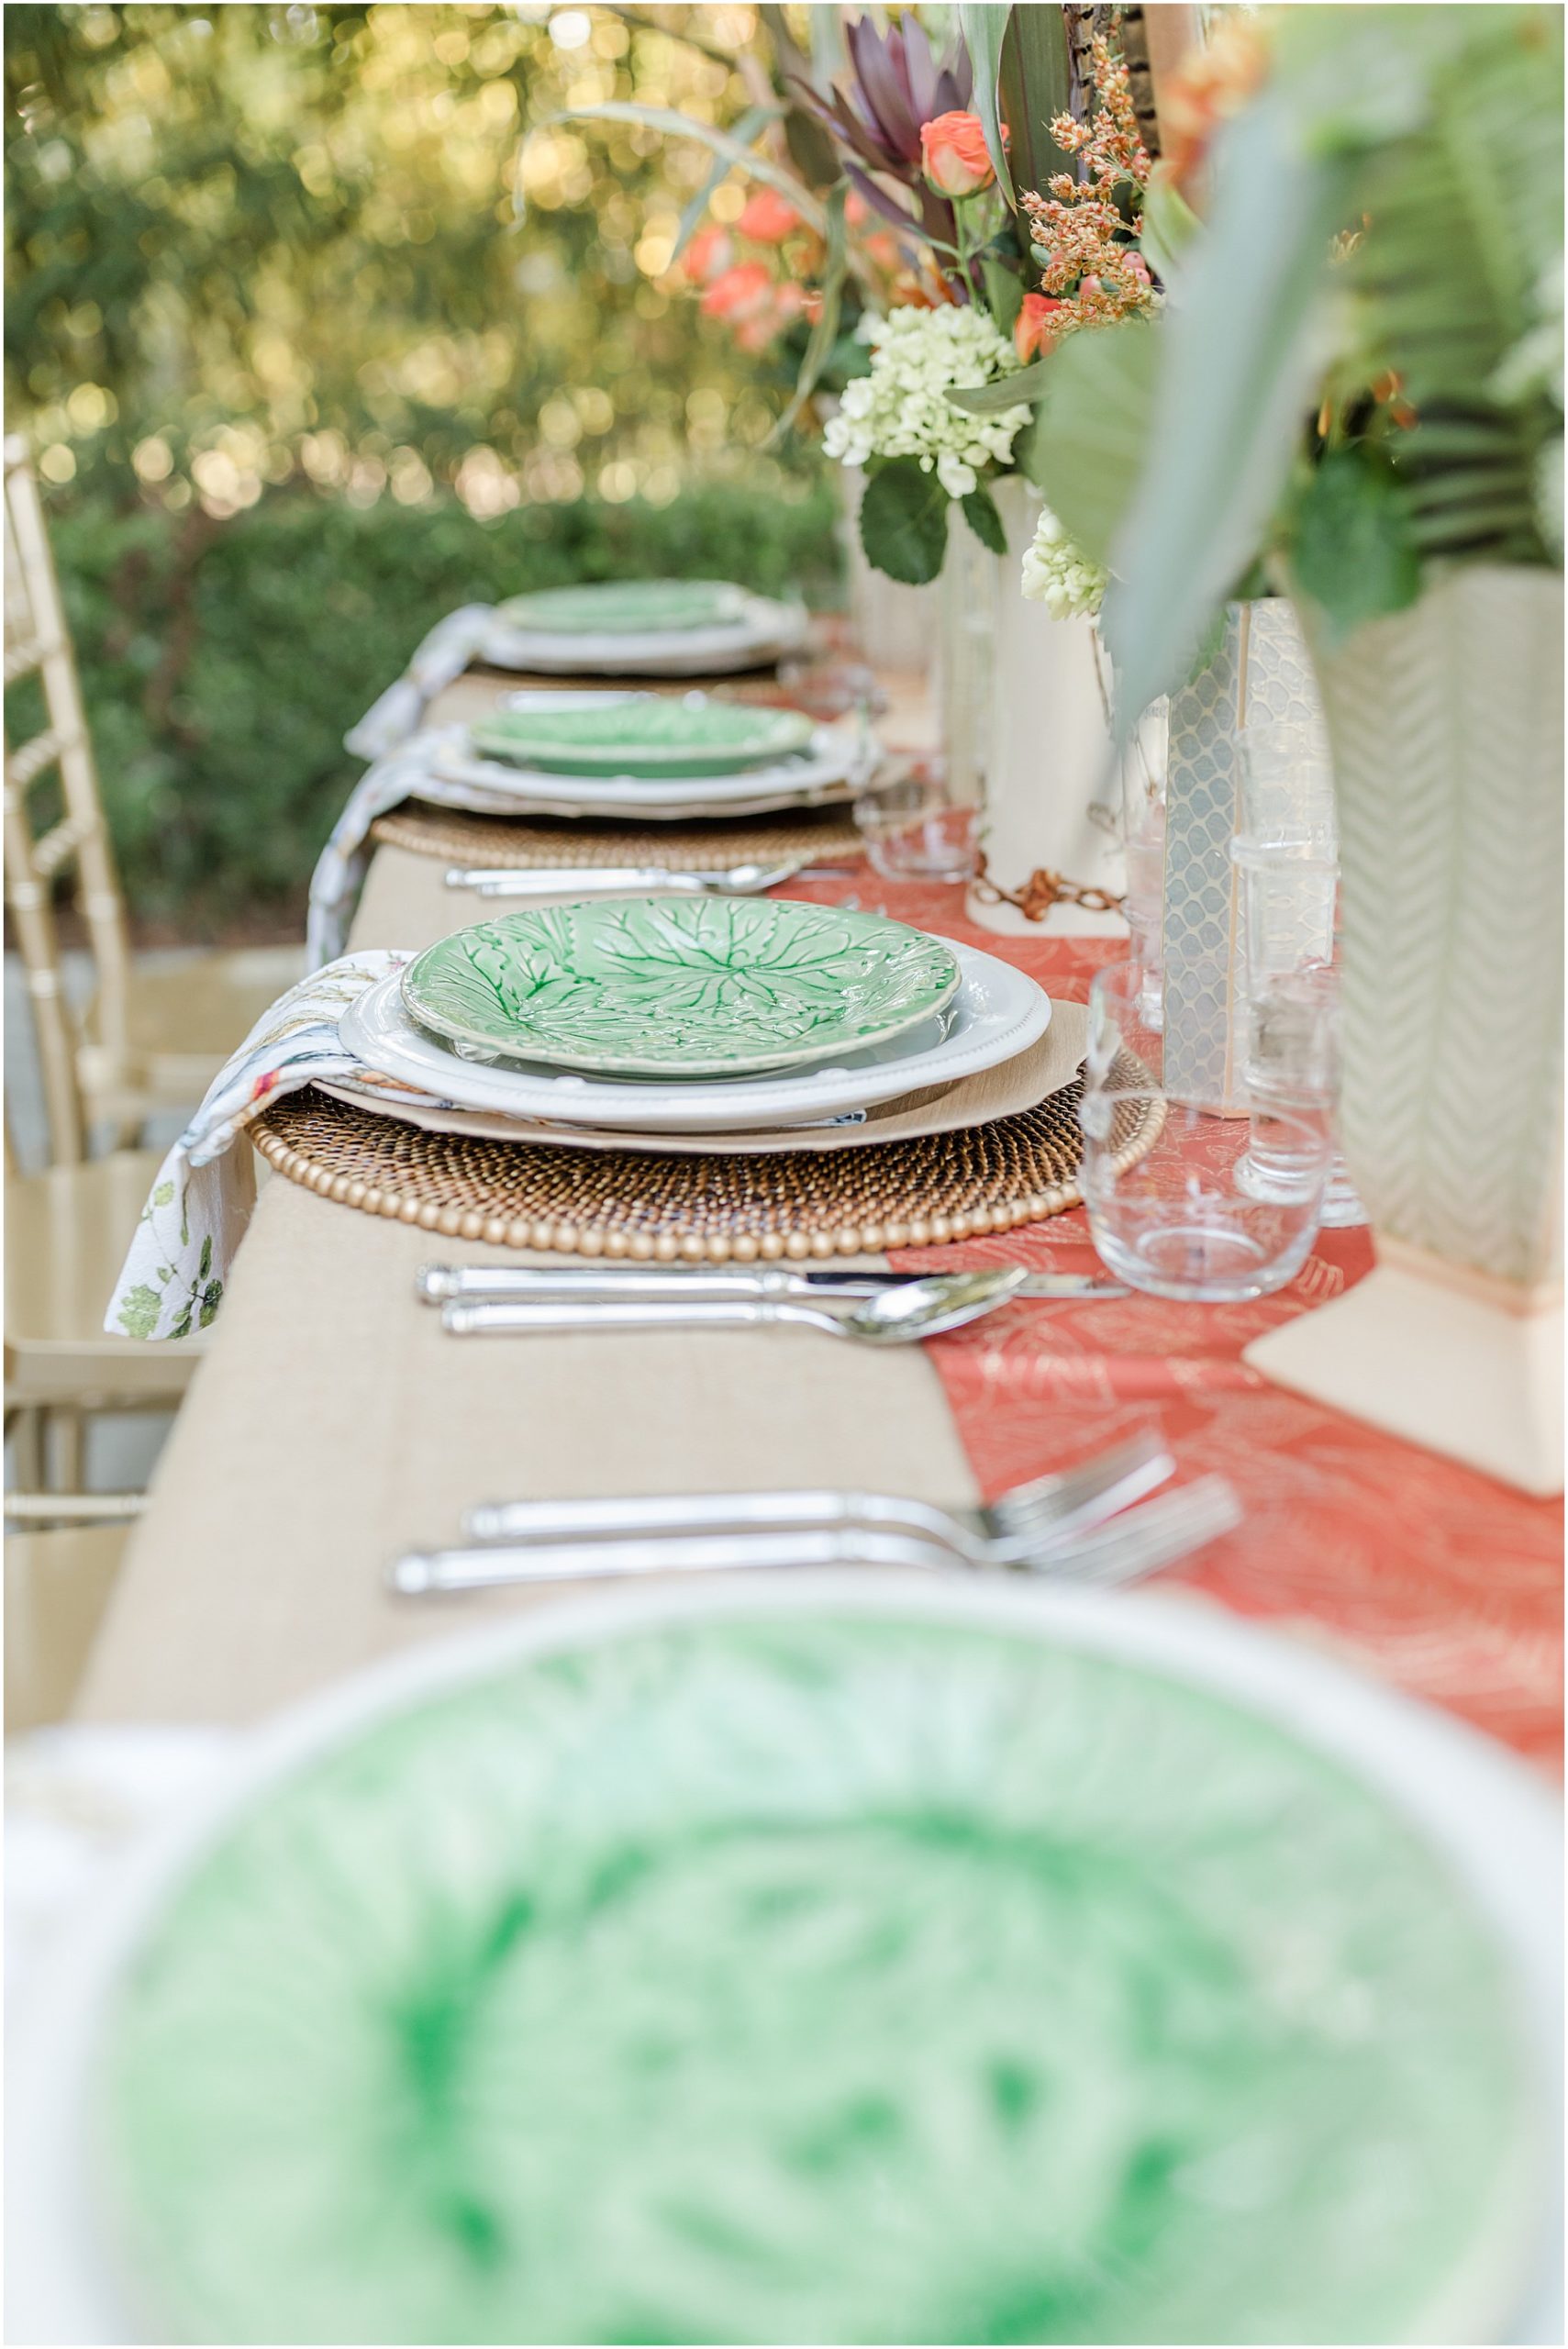 Smith's of Dublin, Fall Table, Thanksgiving Table, Tablescapes, dining al fresco